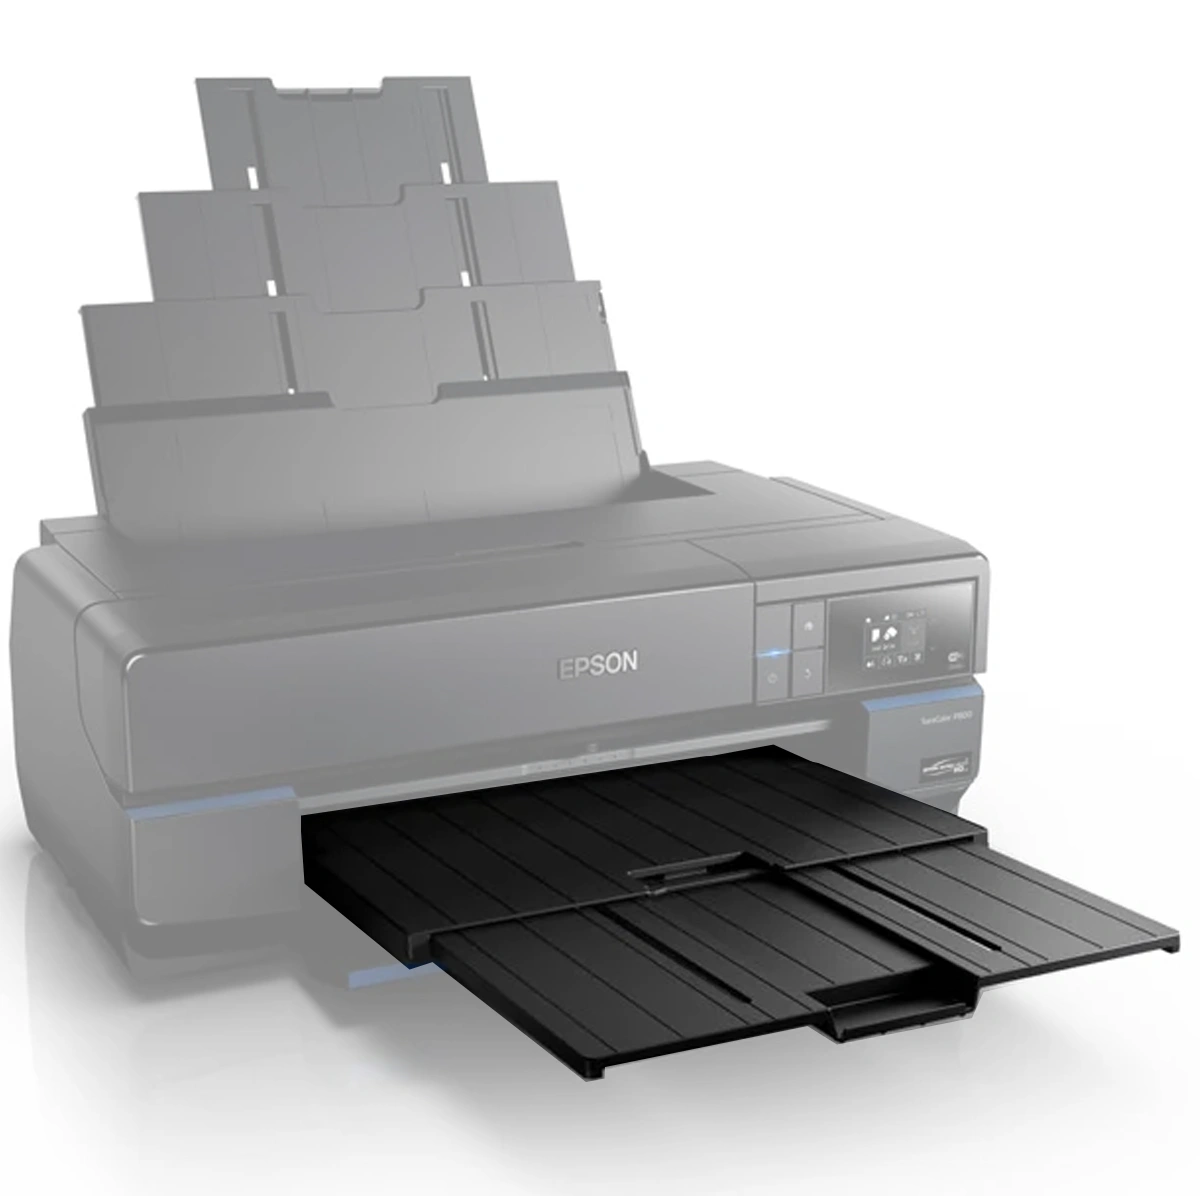 Epson P800 Printer With Front Paper Tray Highlighted